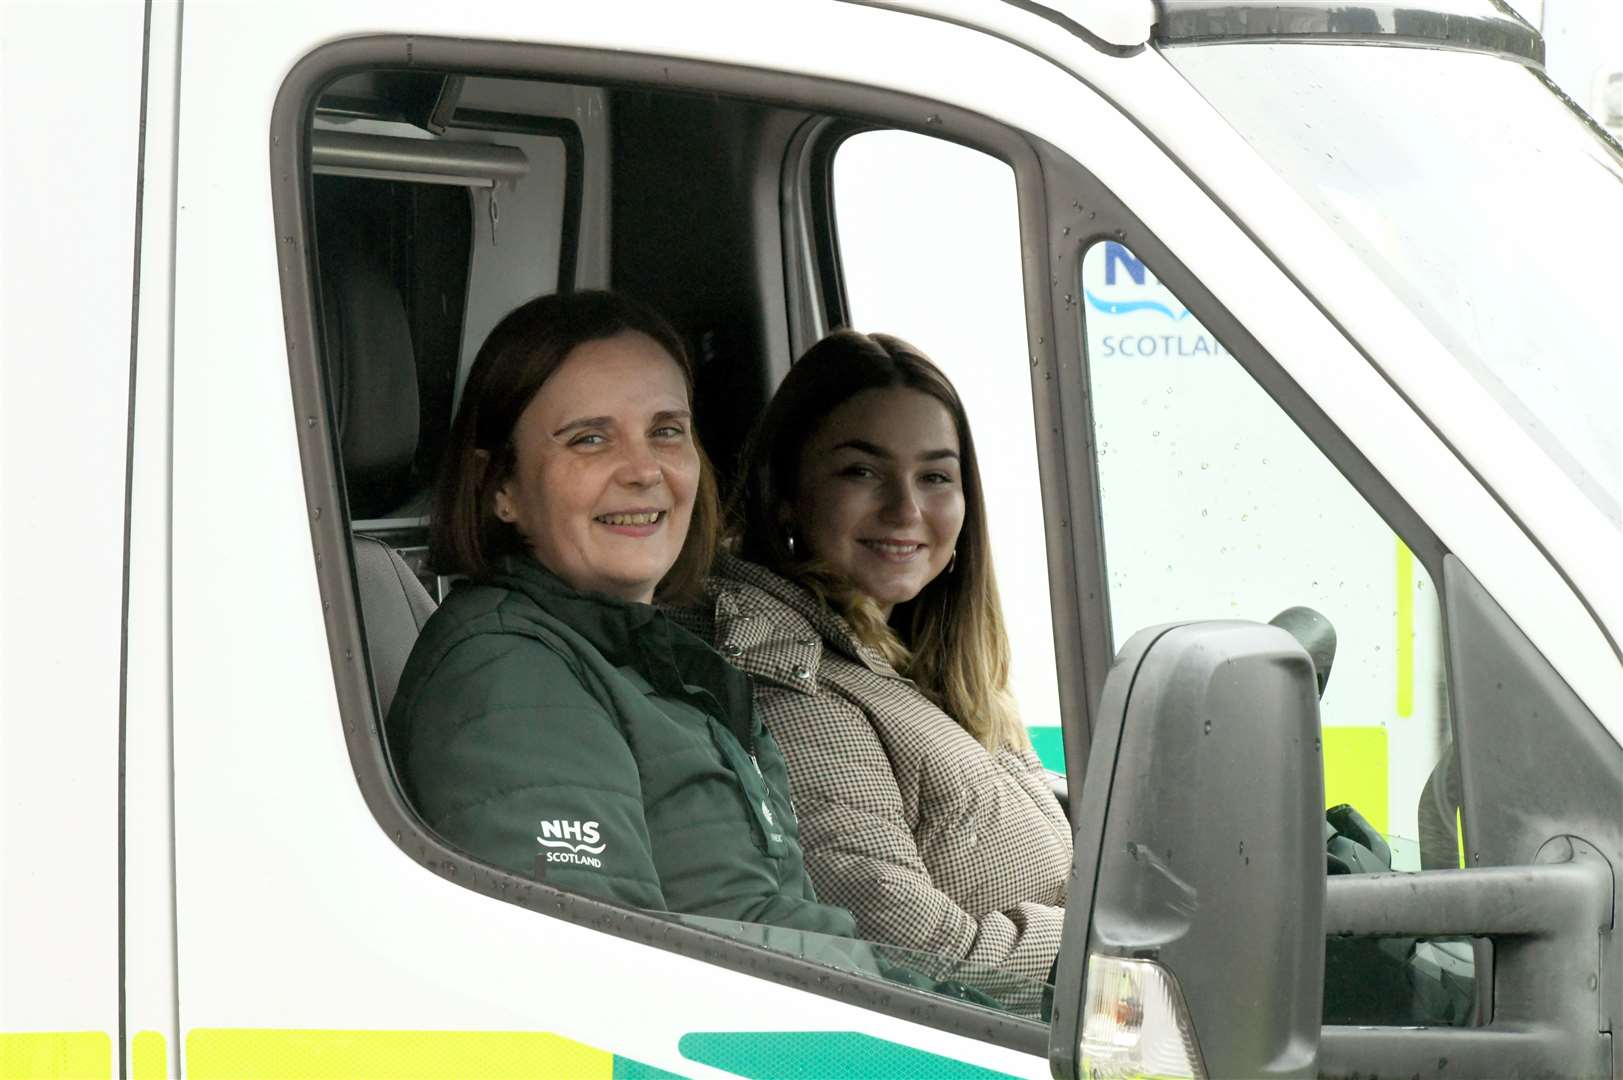 Annabelle in the ambulance with Heather.